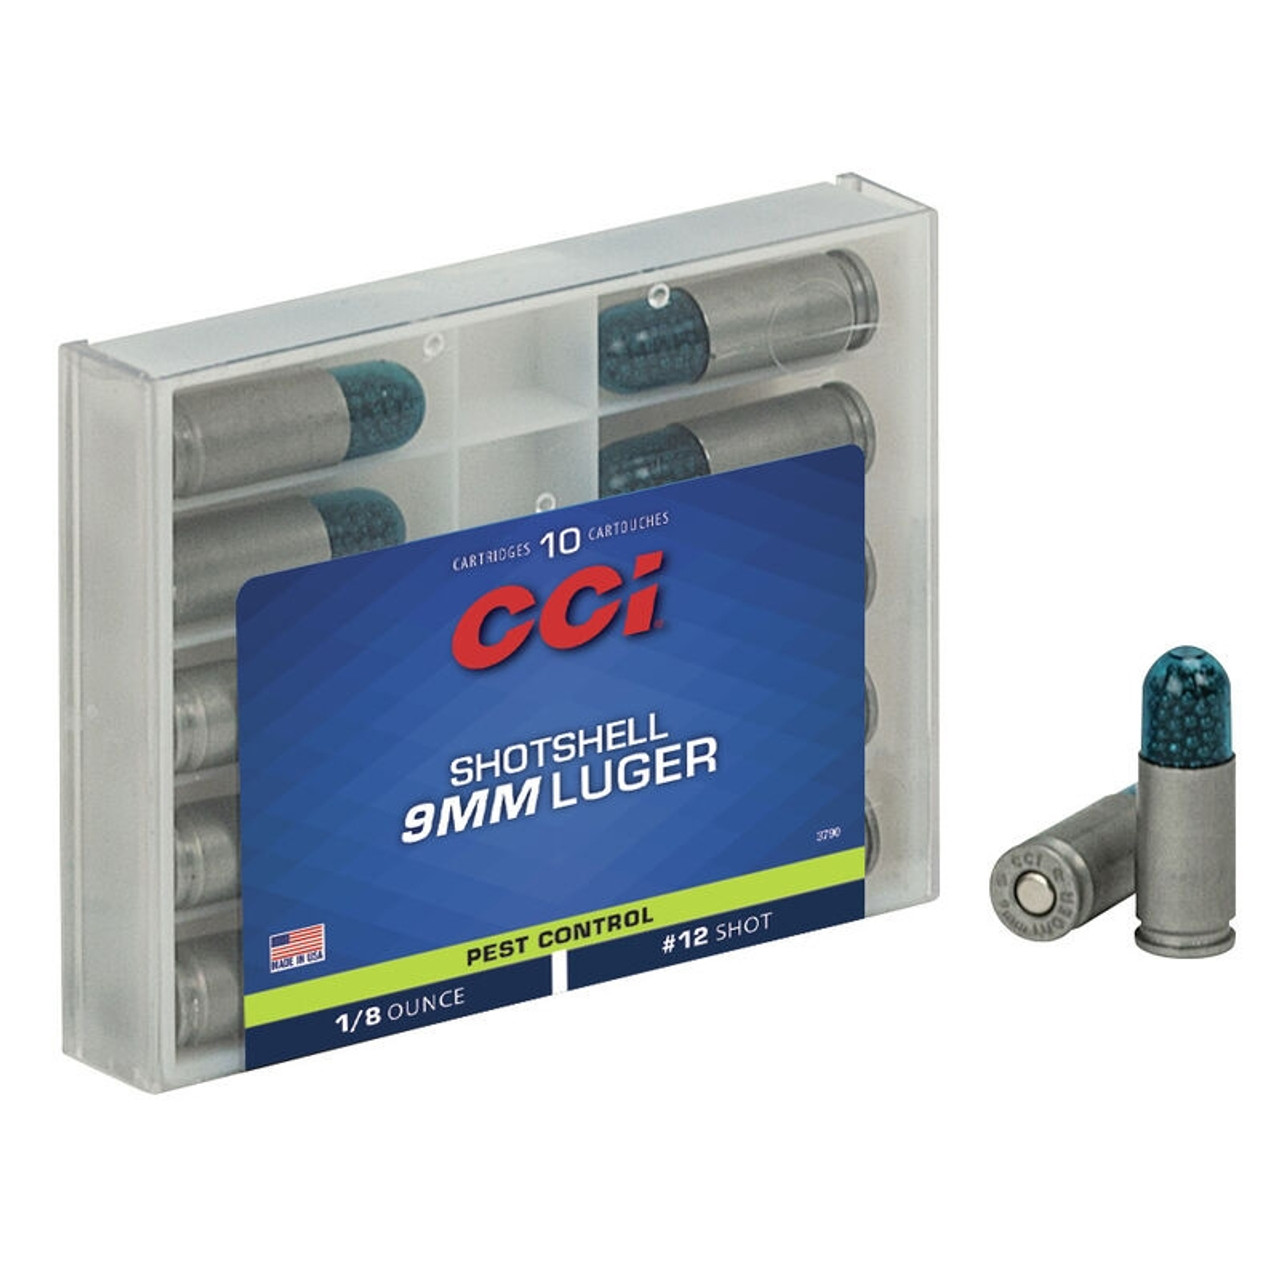 CCI's Shotshell Ammunition features rigid plastic shot capsules that breaks on the rifling. Flexible base wad prevents gas blow-by. It also utilizes reliable CCI primers.

Specifications and Features:

Caliber: 9mm Luger
Bullet Type: Shotshell
Bullet Weight: 53 GR
Muzzle Energy: 299 ft lbs
Muzzle Velocity: 1450 fps
Rounds Per Box: 10
Application: Performance/Protection
Casing Material: Aluminum
.